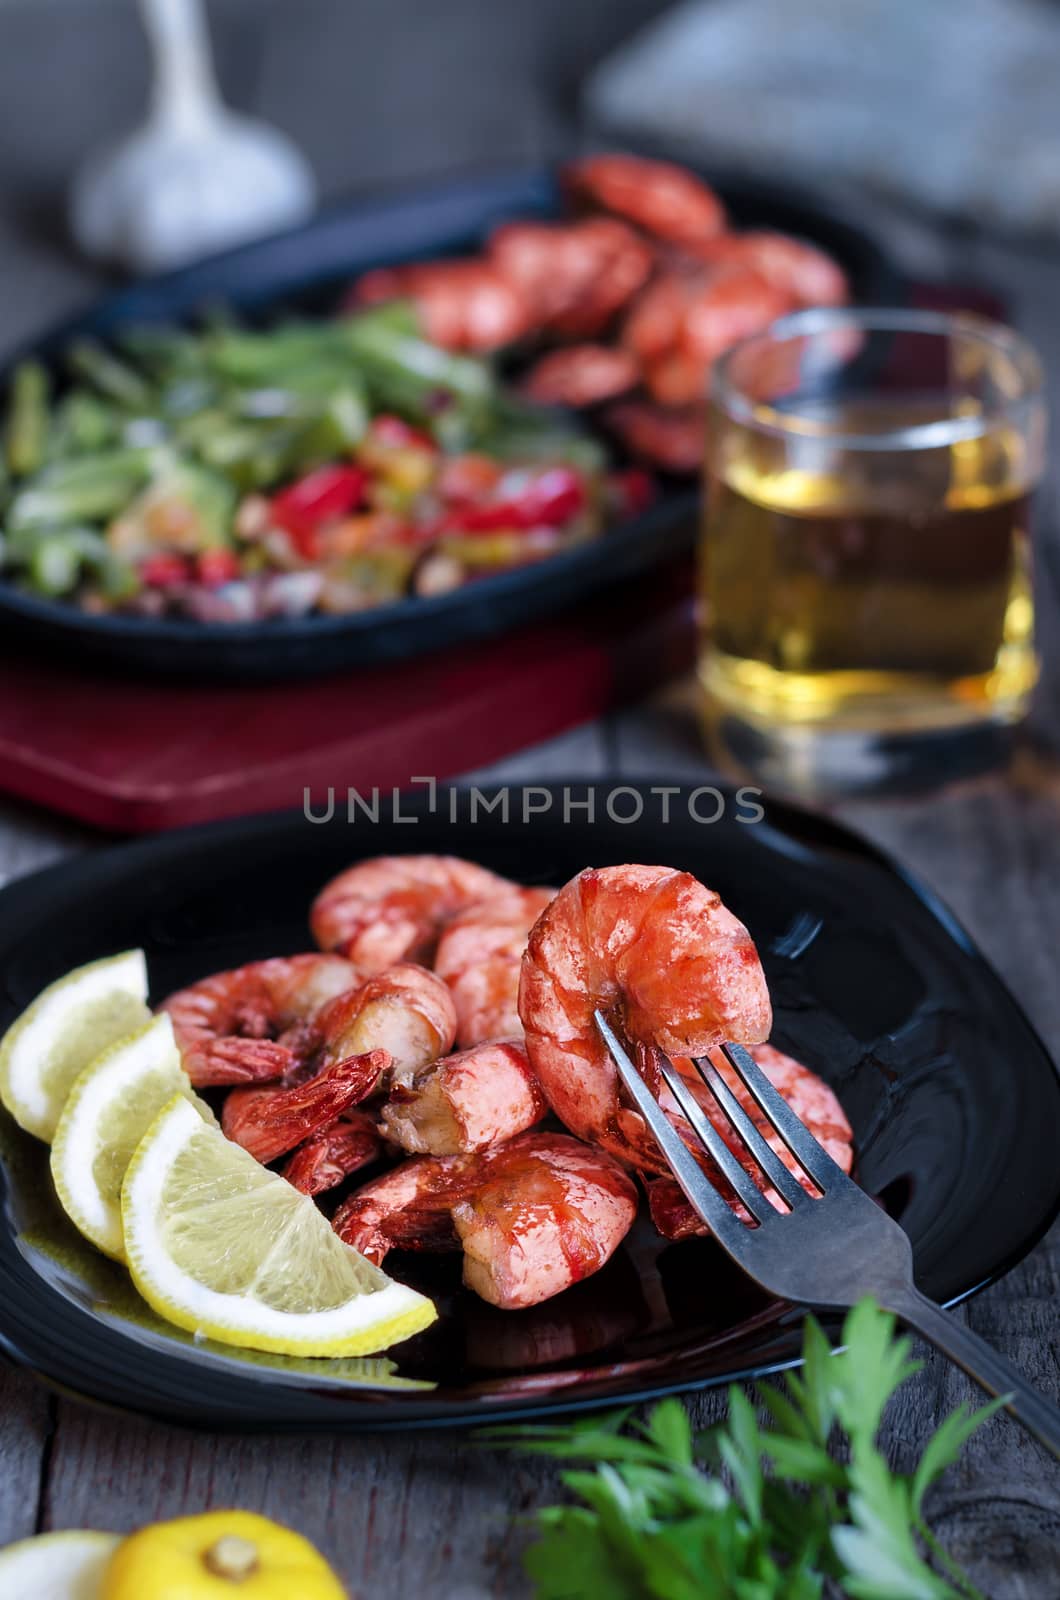 Fried shrimp with lemon, vegetables and beer. by Gaina